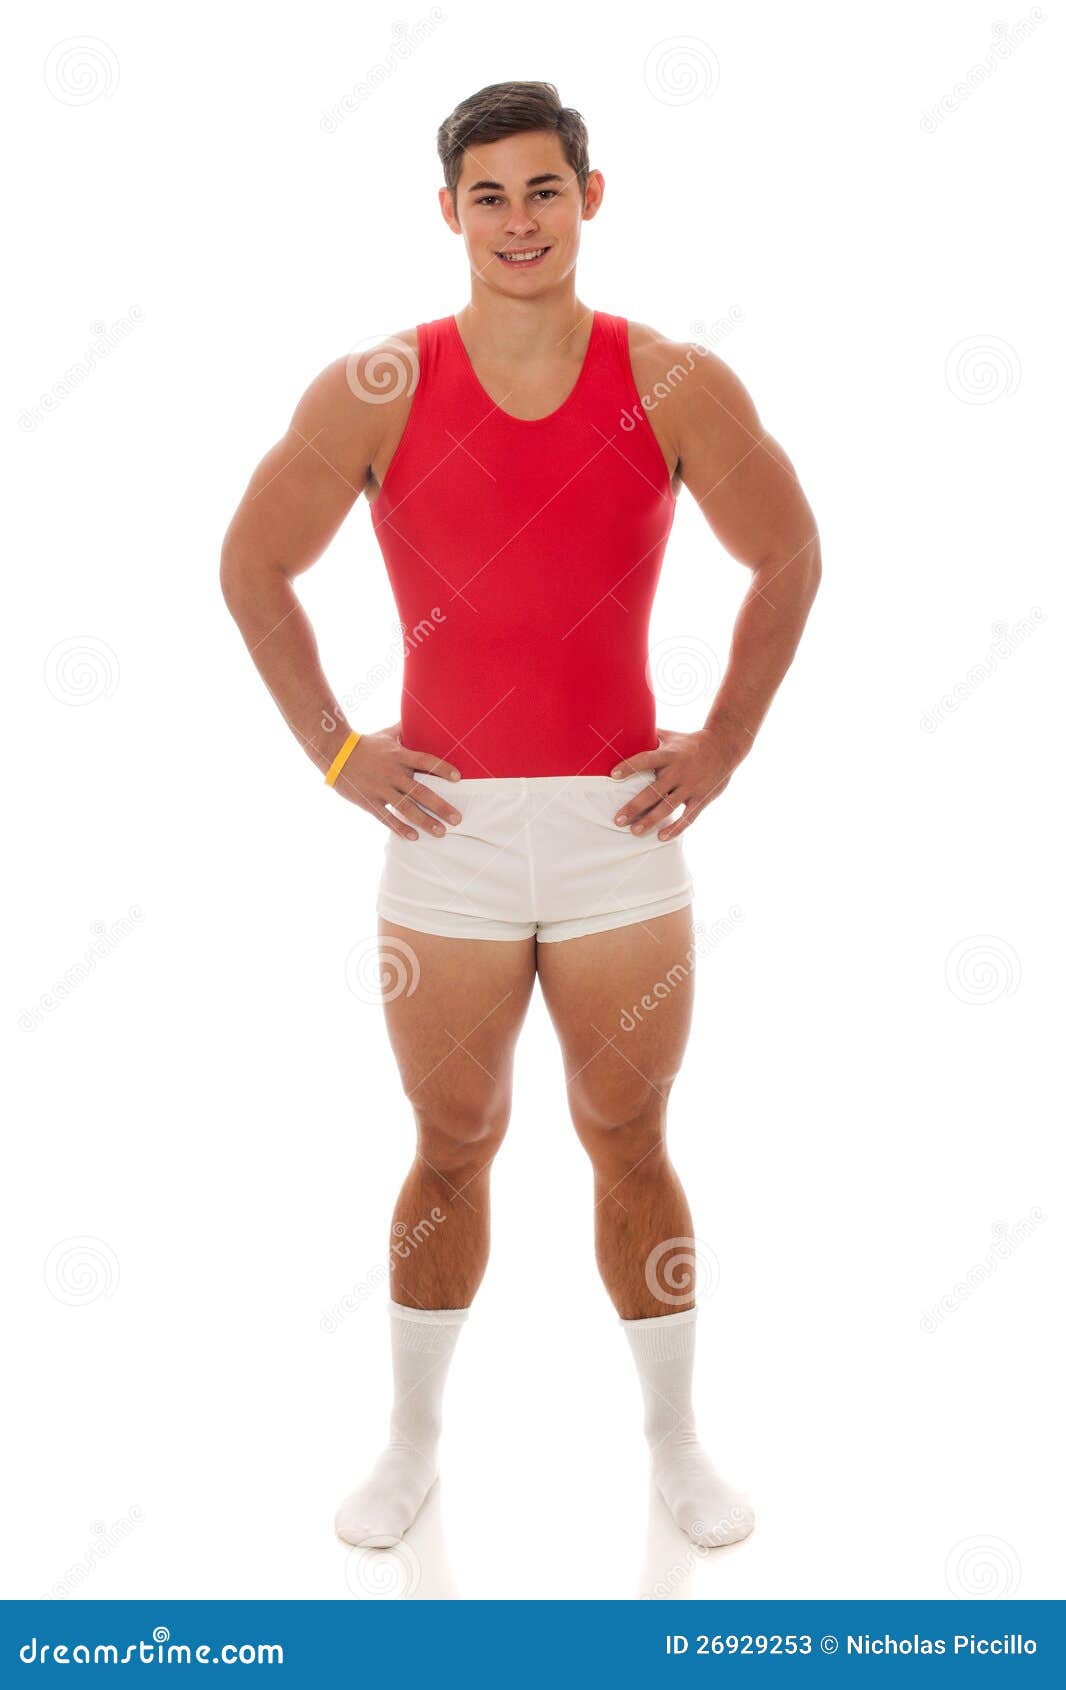 Male Gymnast stock image. Image of person, young, uniform - 26929253